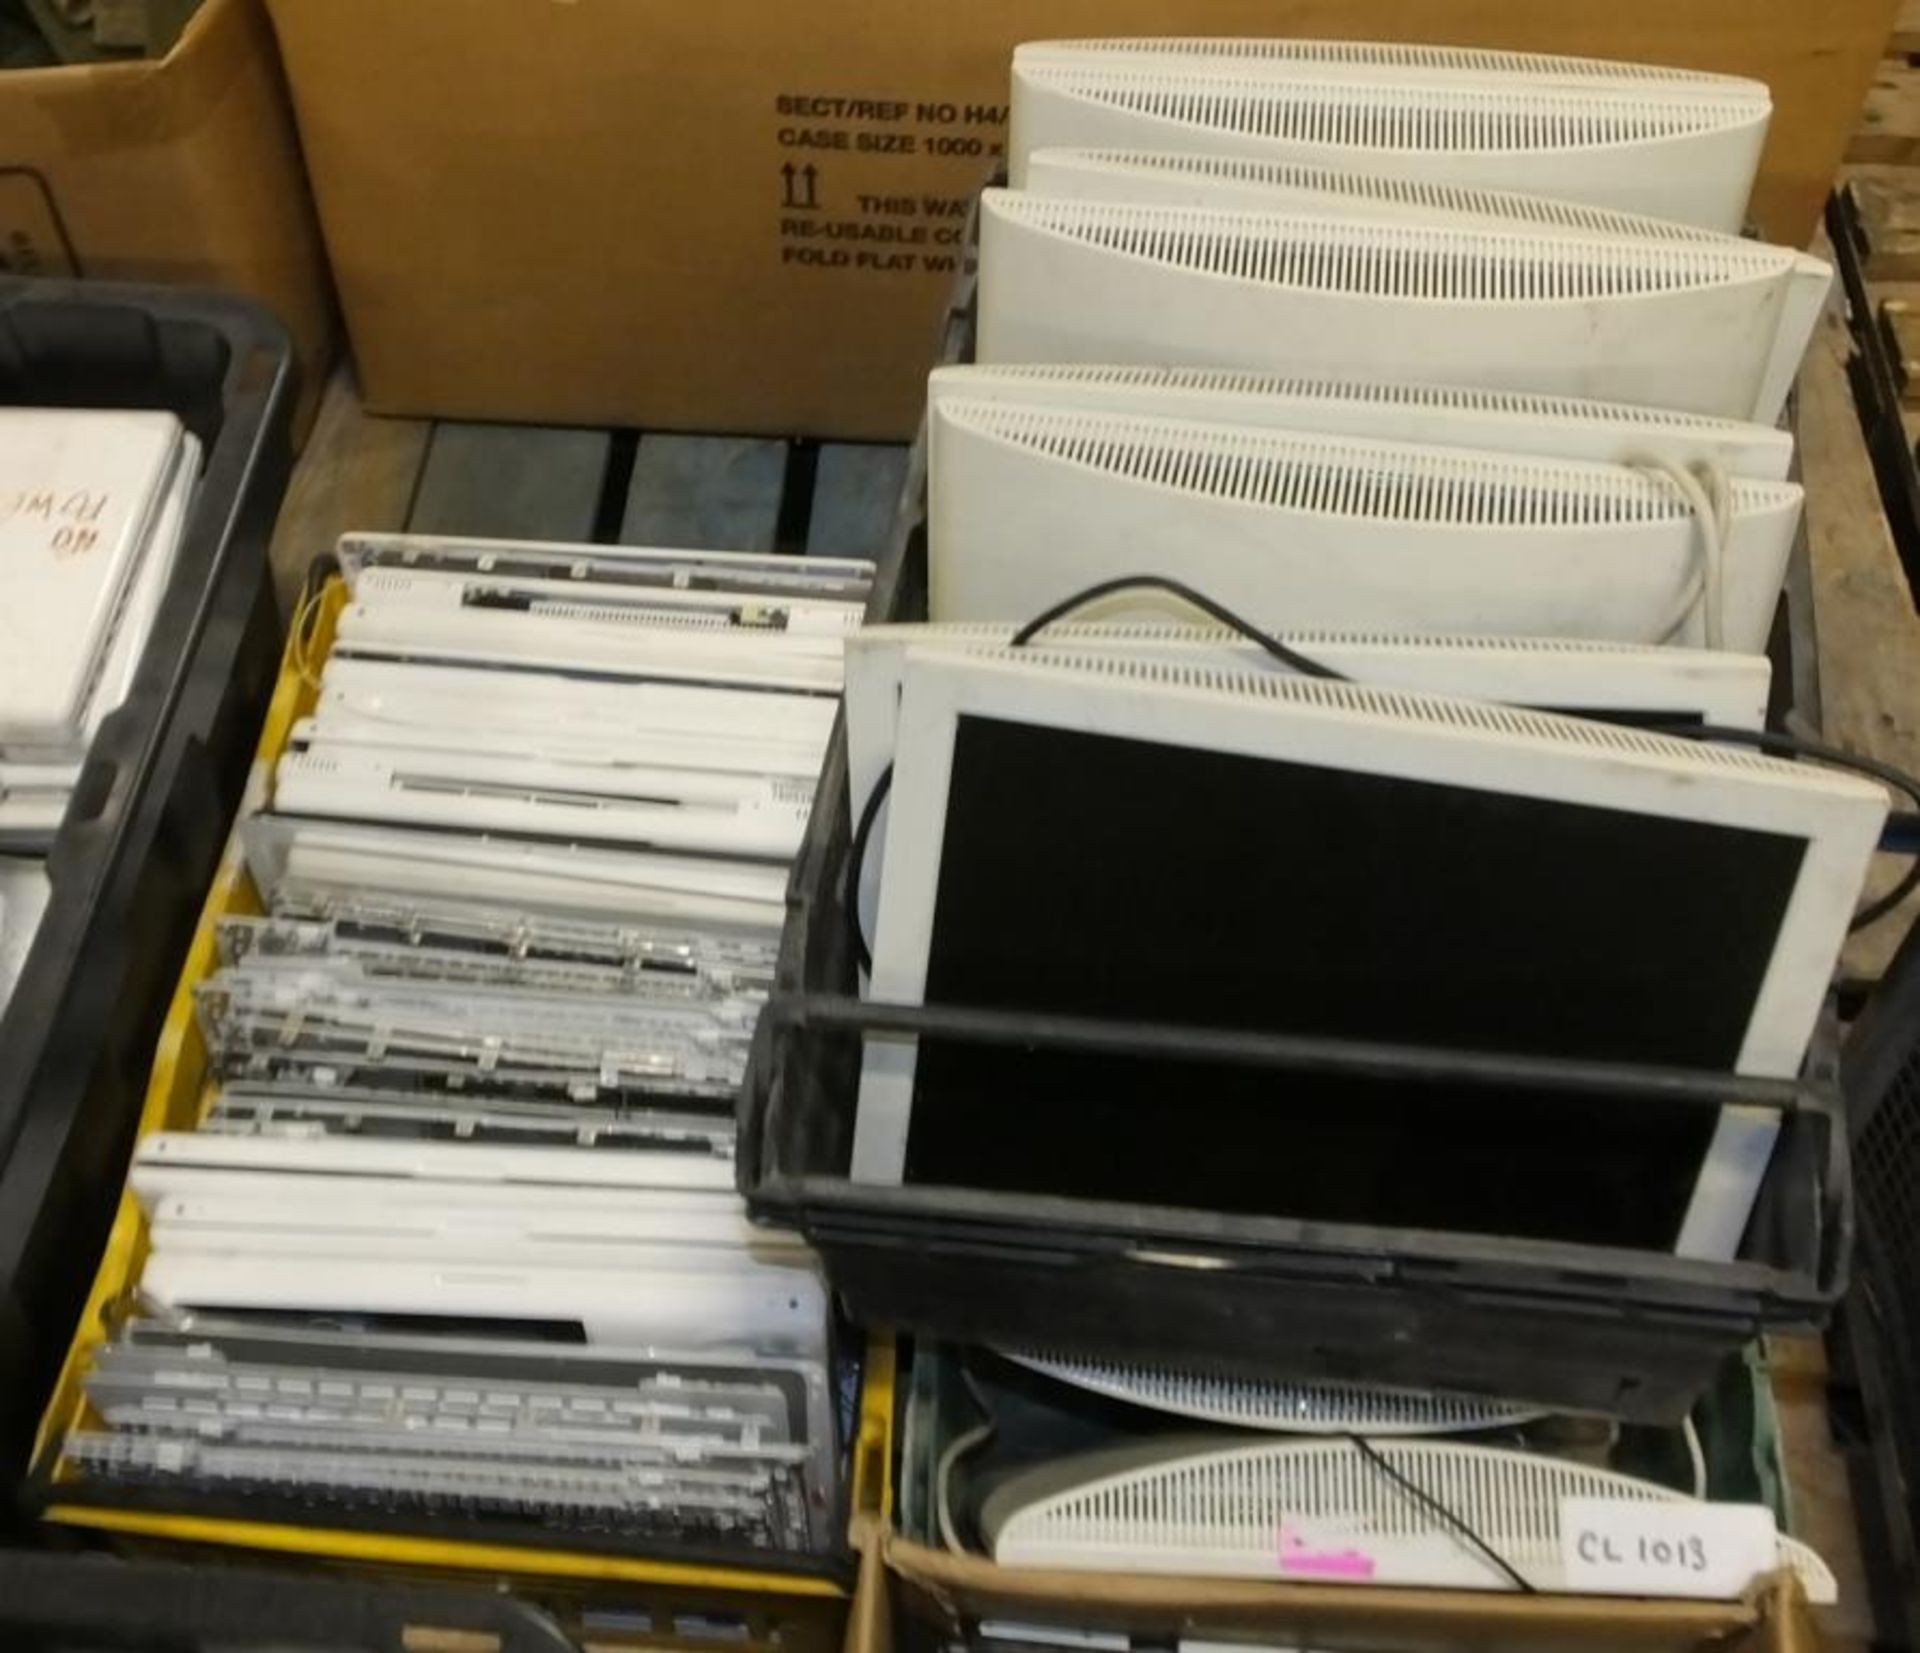 AS SPARES - LCD Screens, Apple Laptop Boards, Flat screen monitors - Image 2 of 4